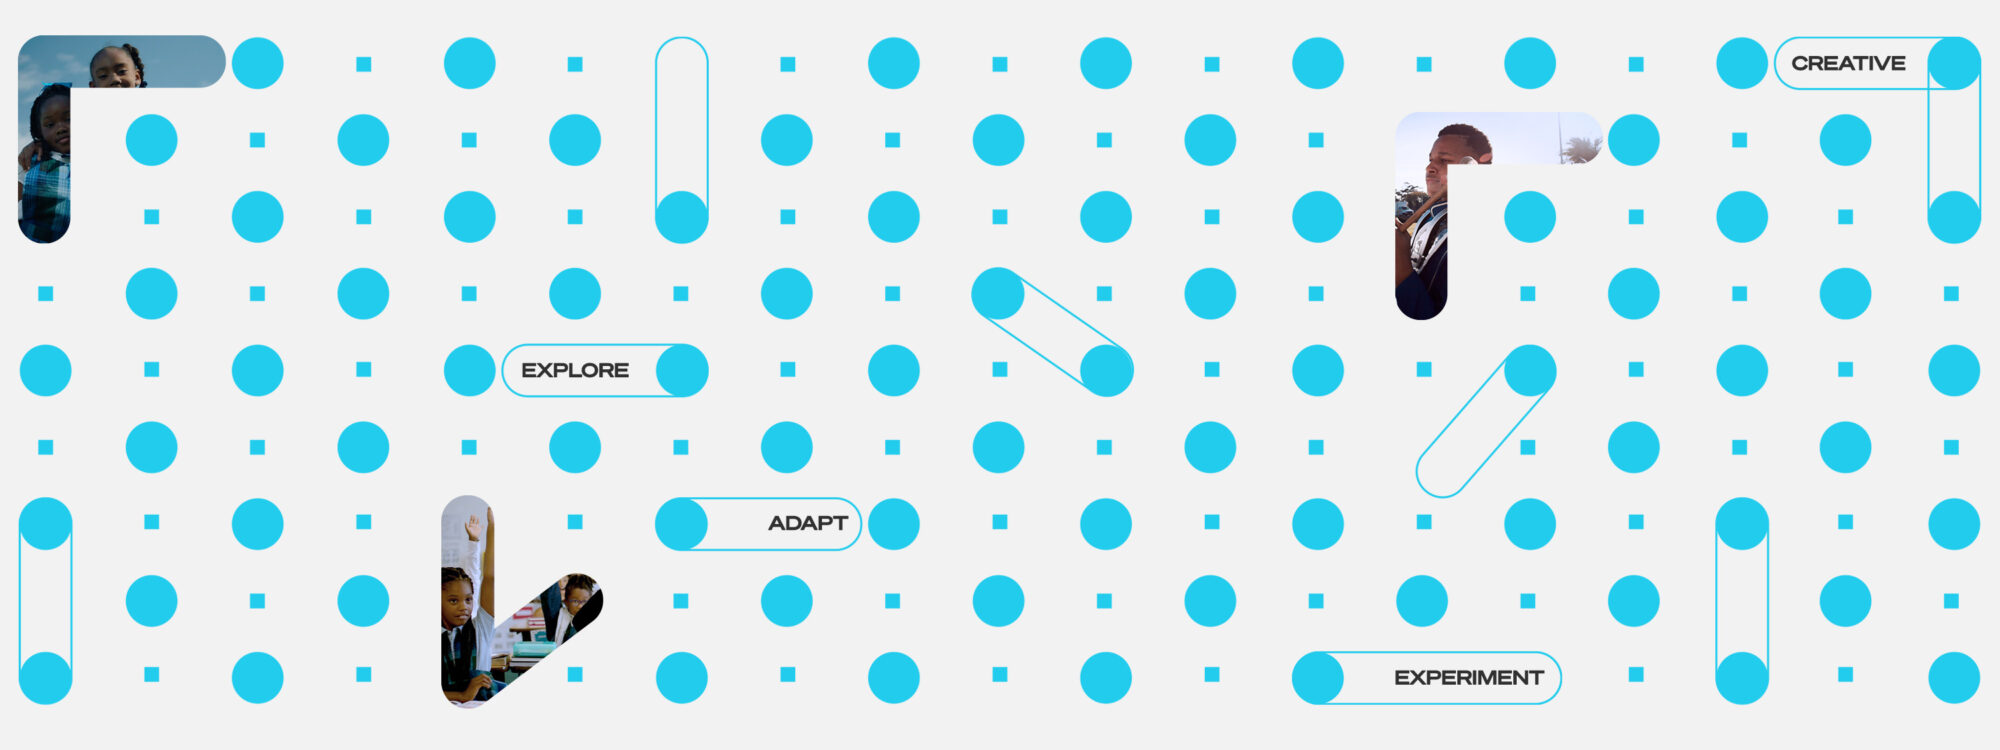 Blue circles on a white background